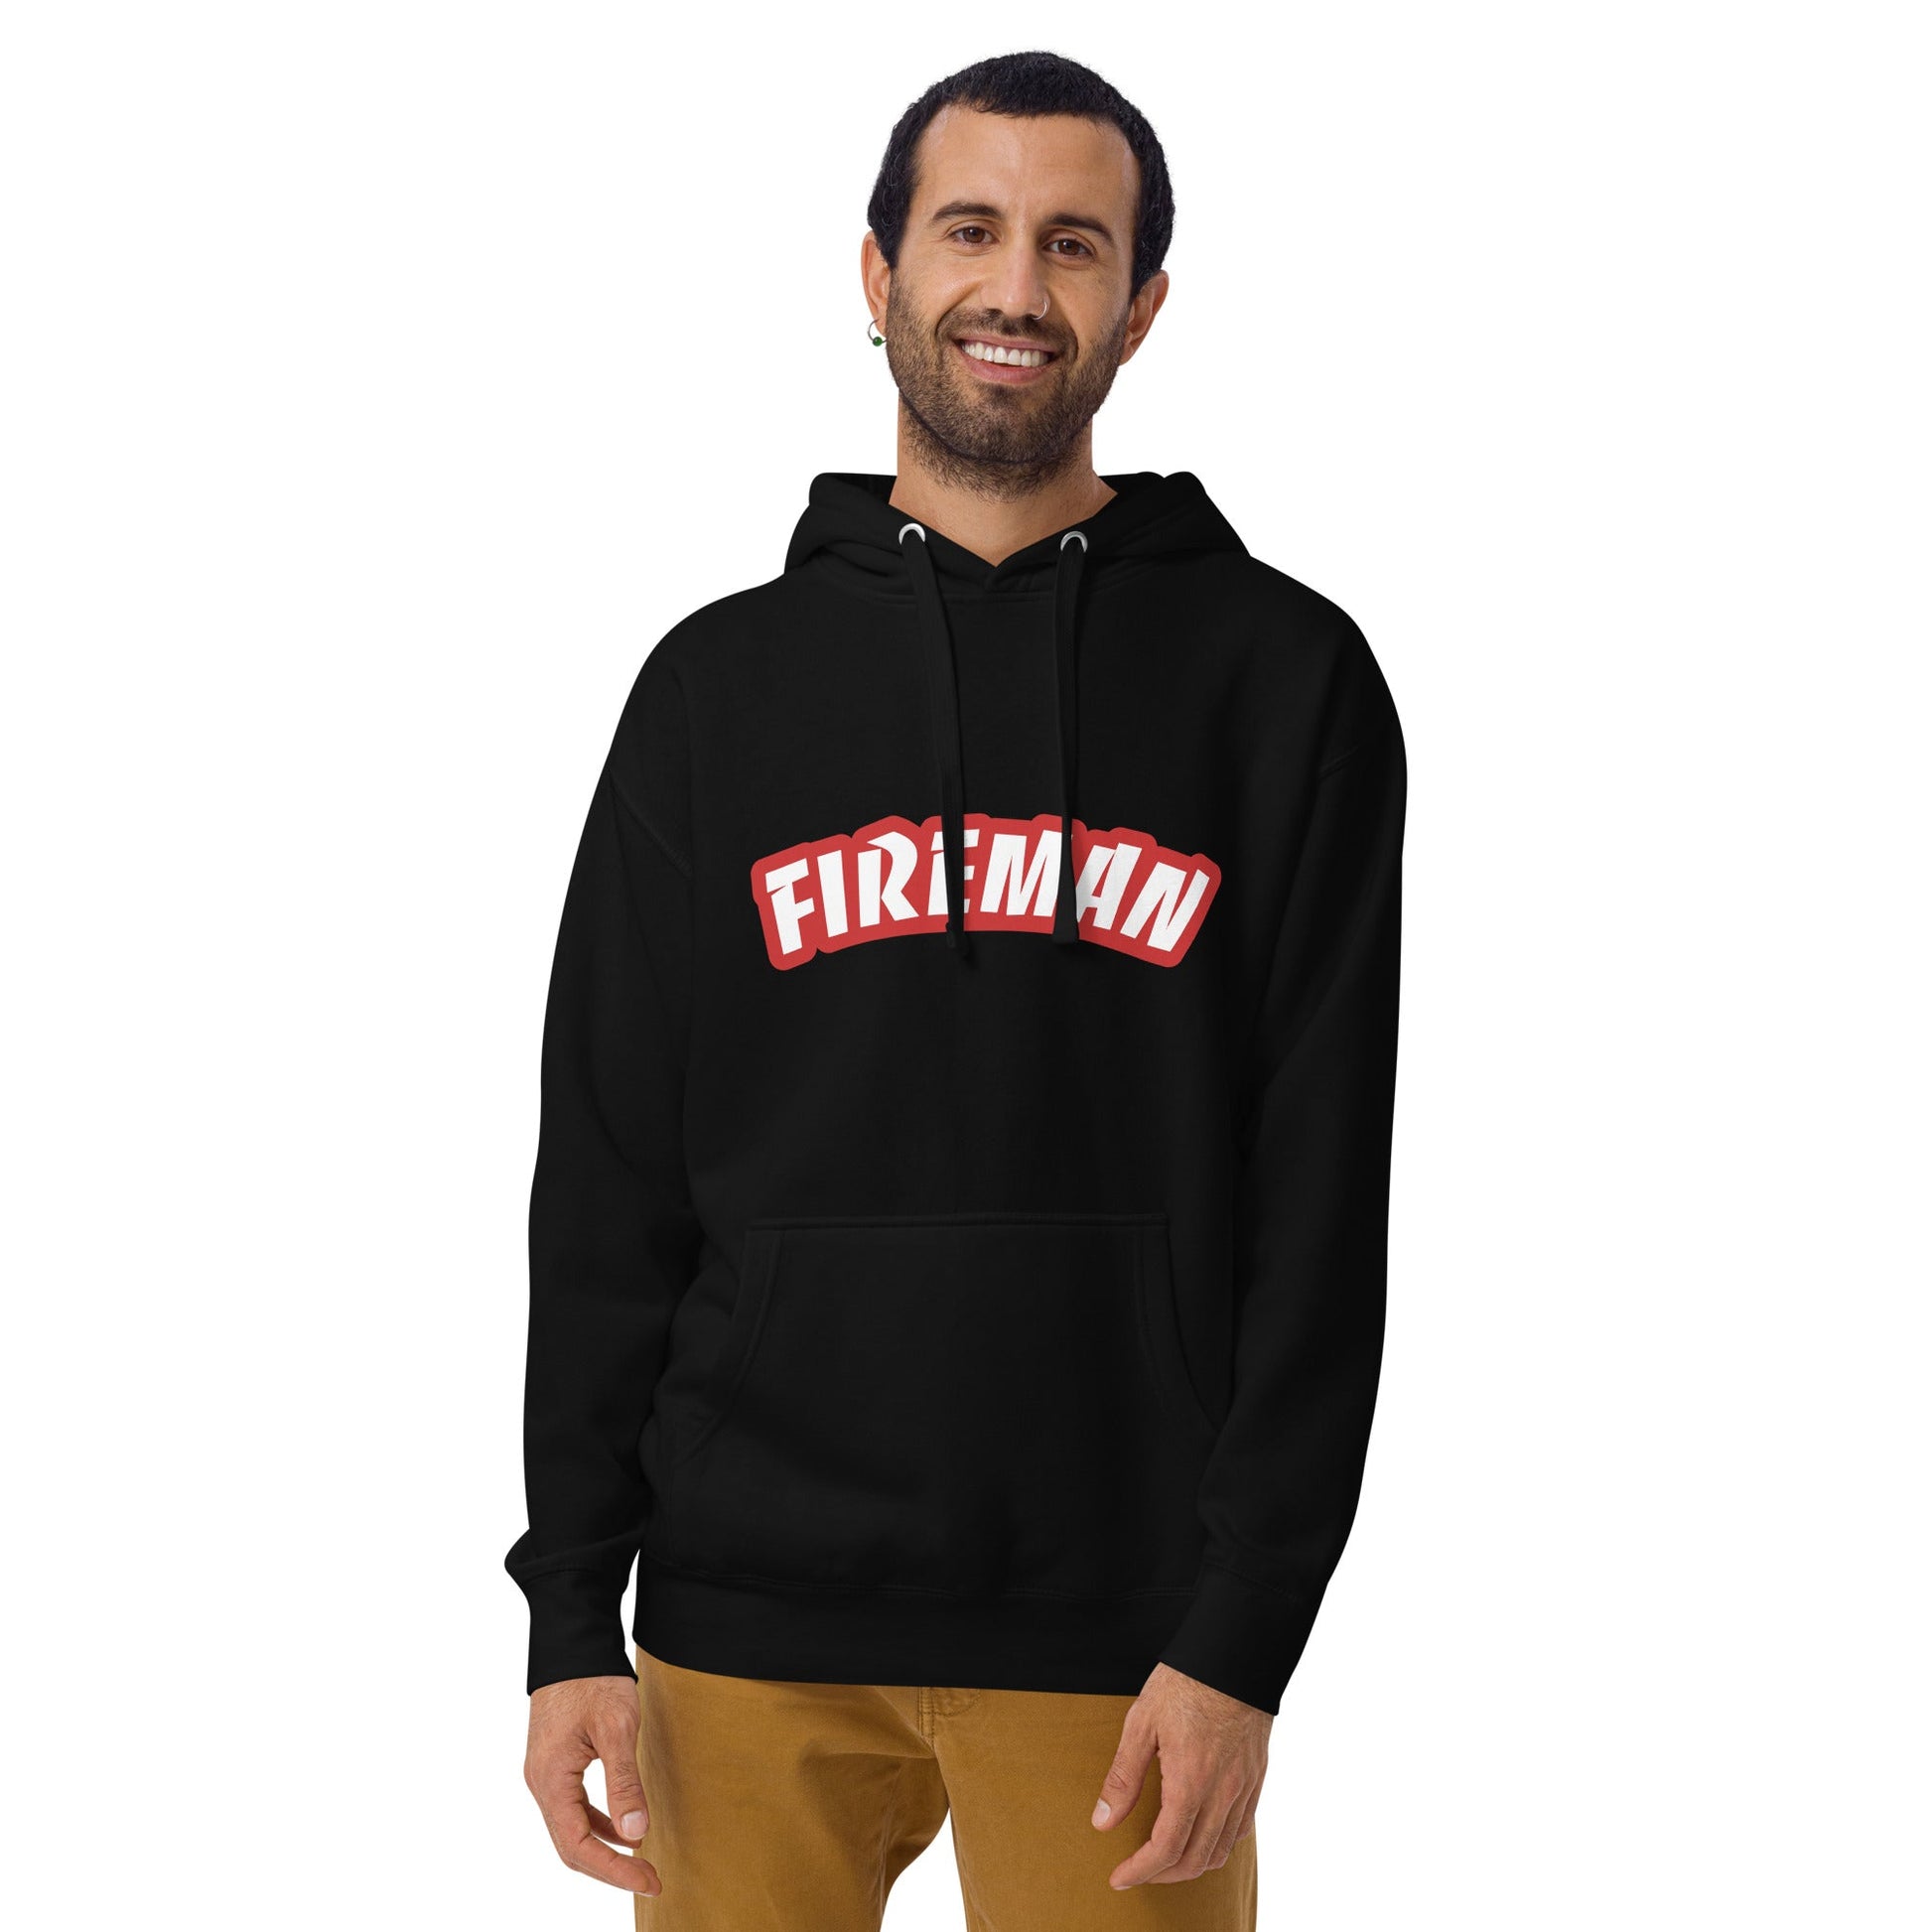 Smiling man wearing black hoodie with Fireman text on white background